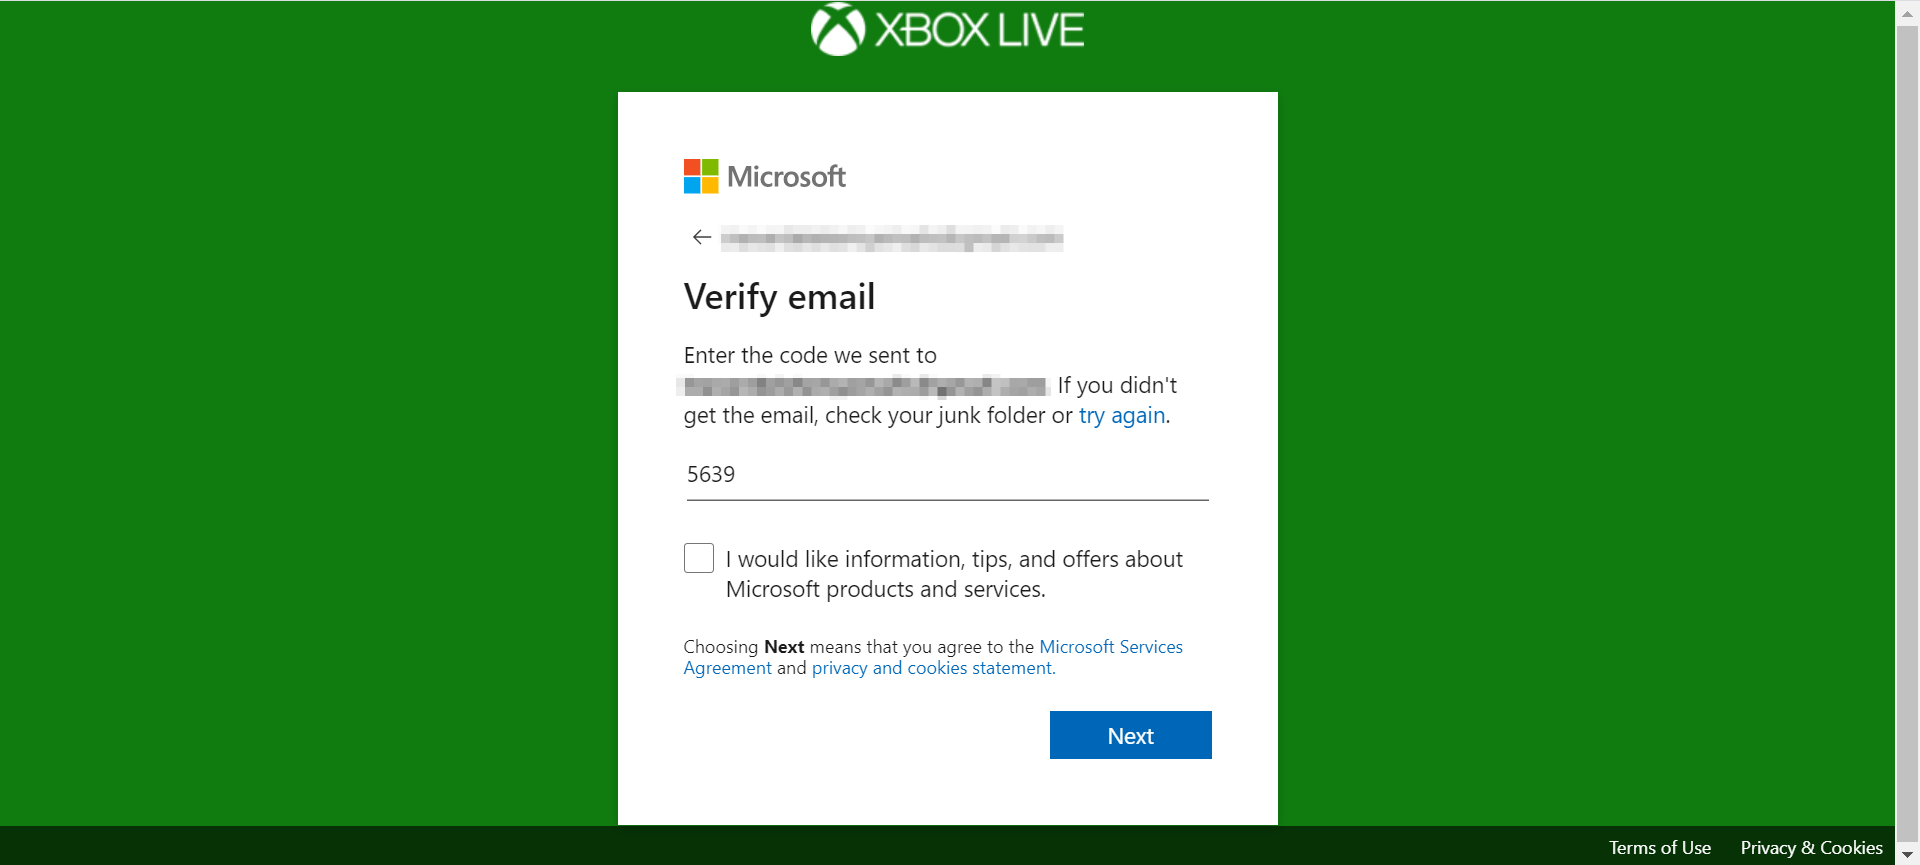 How to get Xbox Live   8